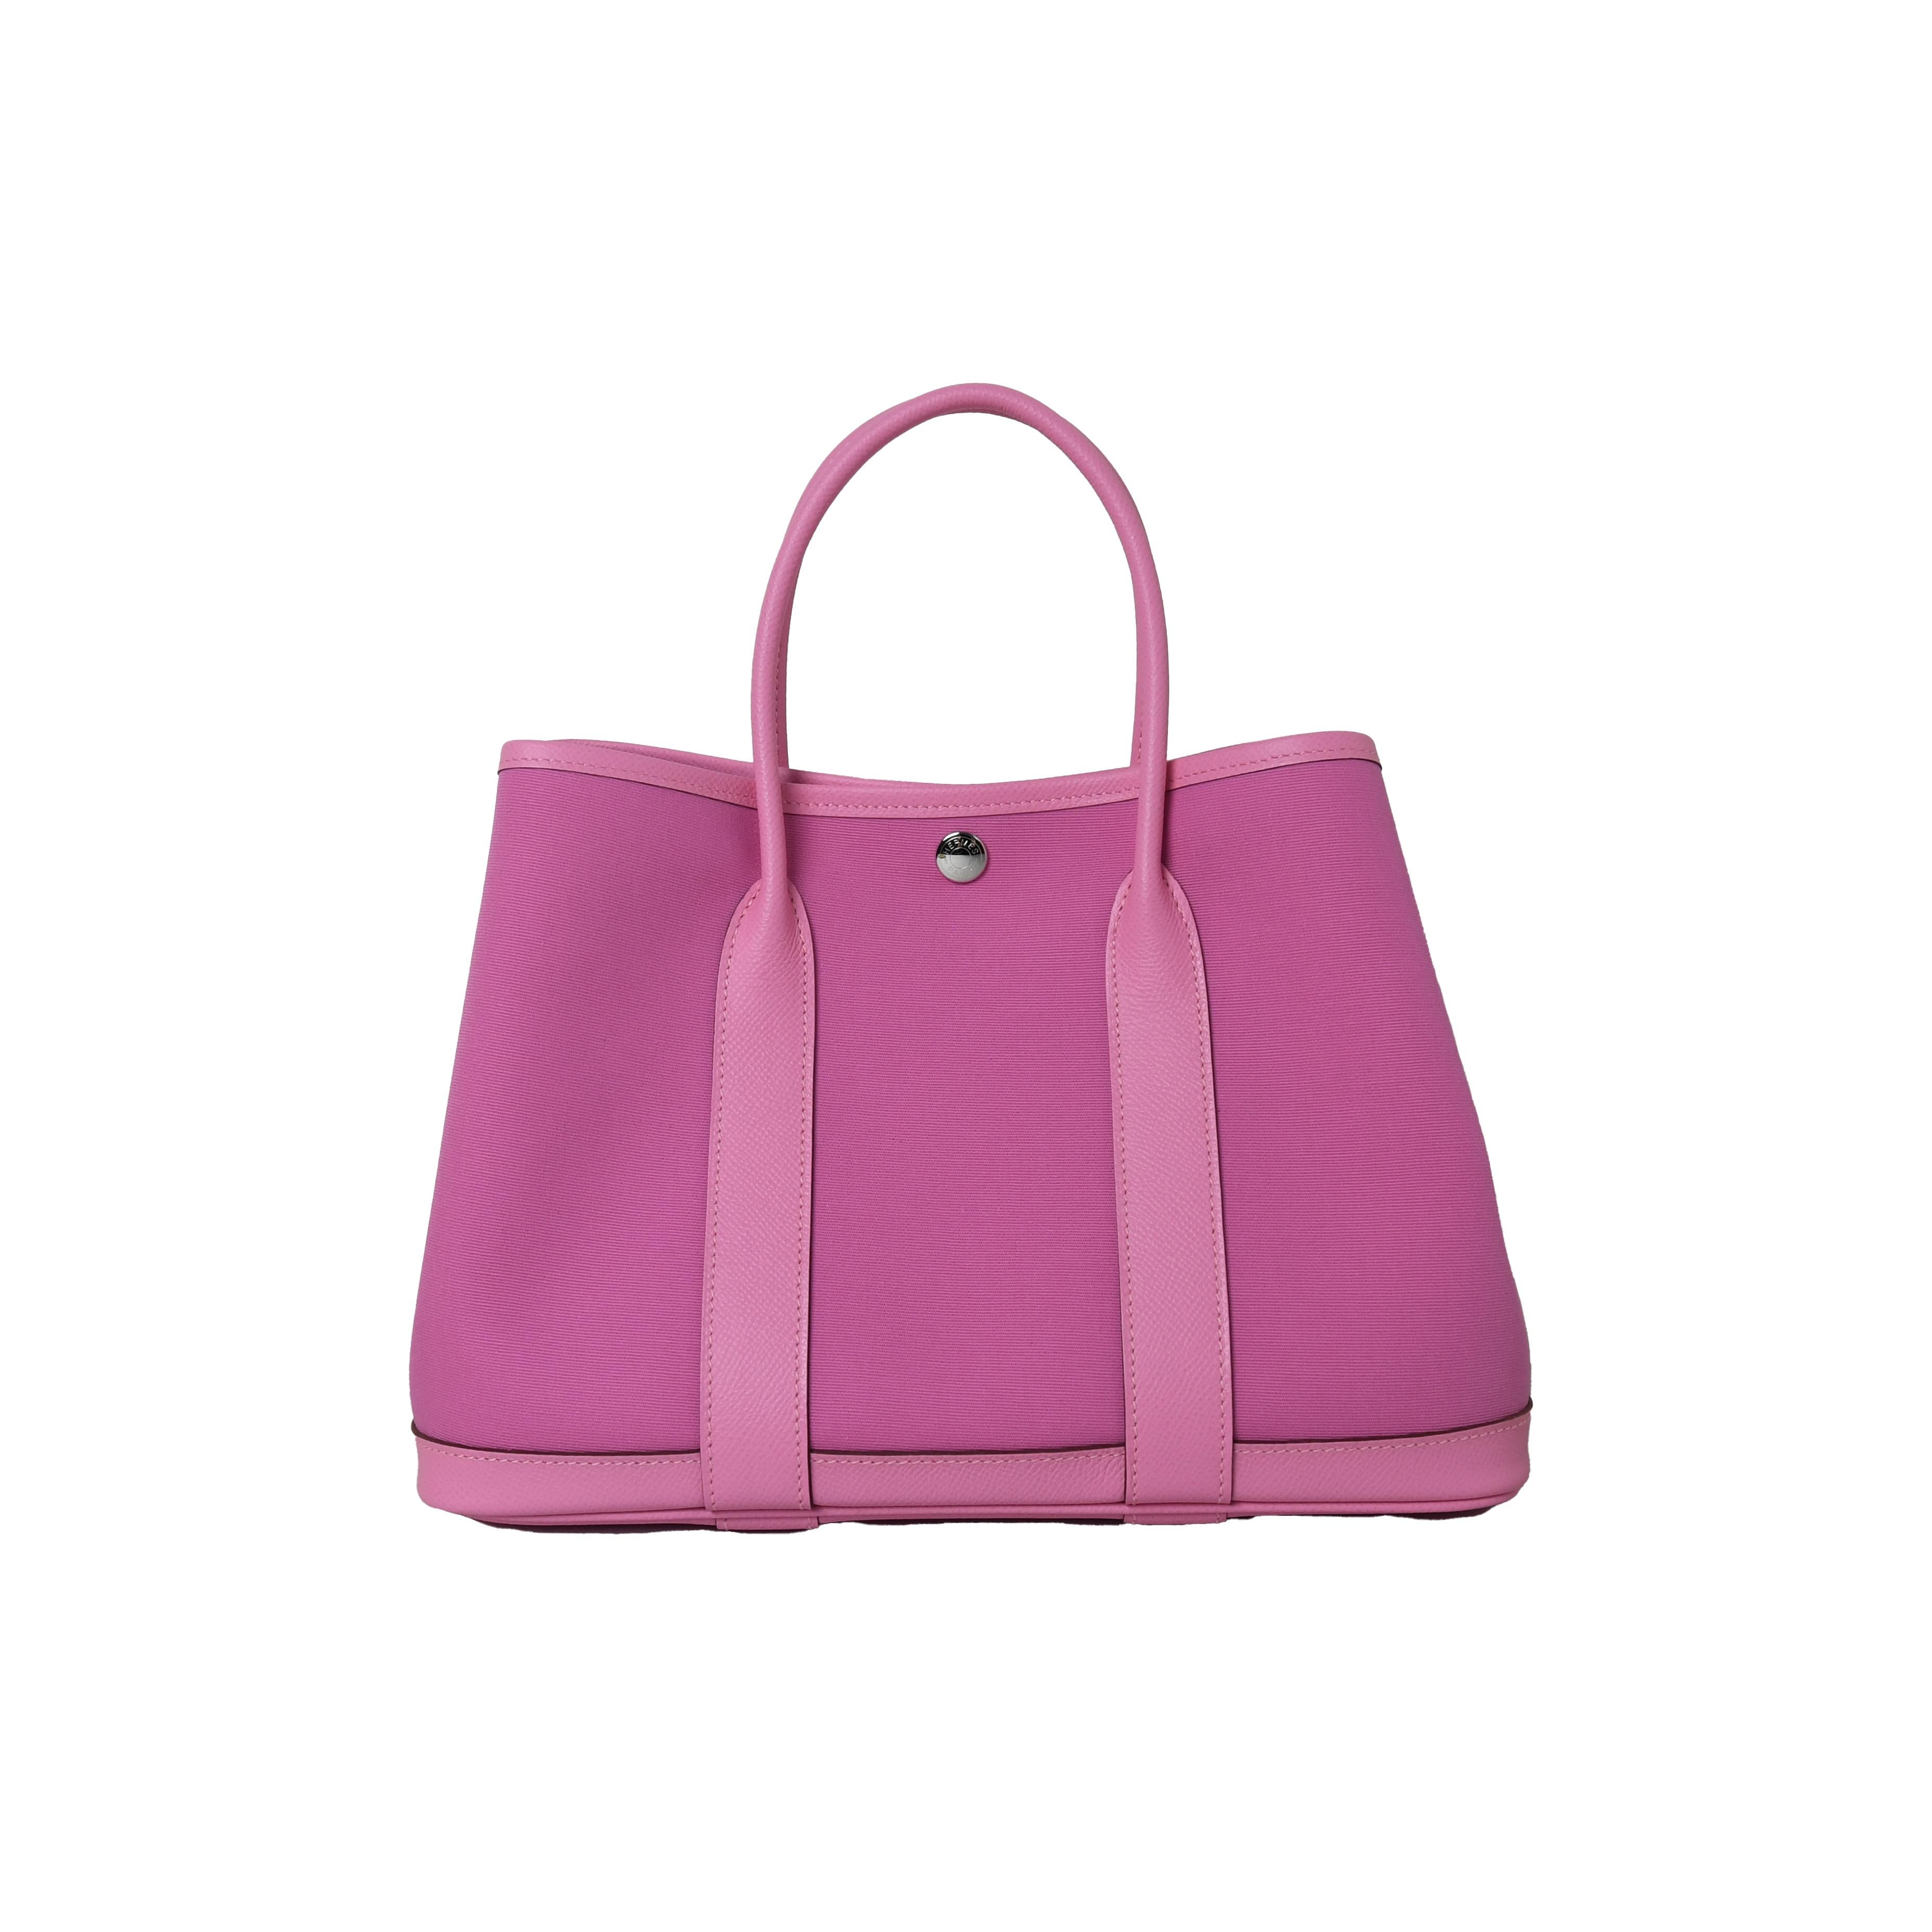 Hermes Garden Party 30 Bag Bubblegum In New Condition For Sale In Flushing, NY